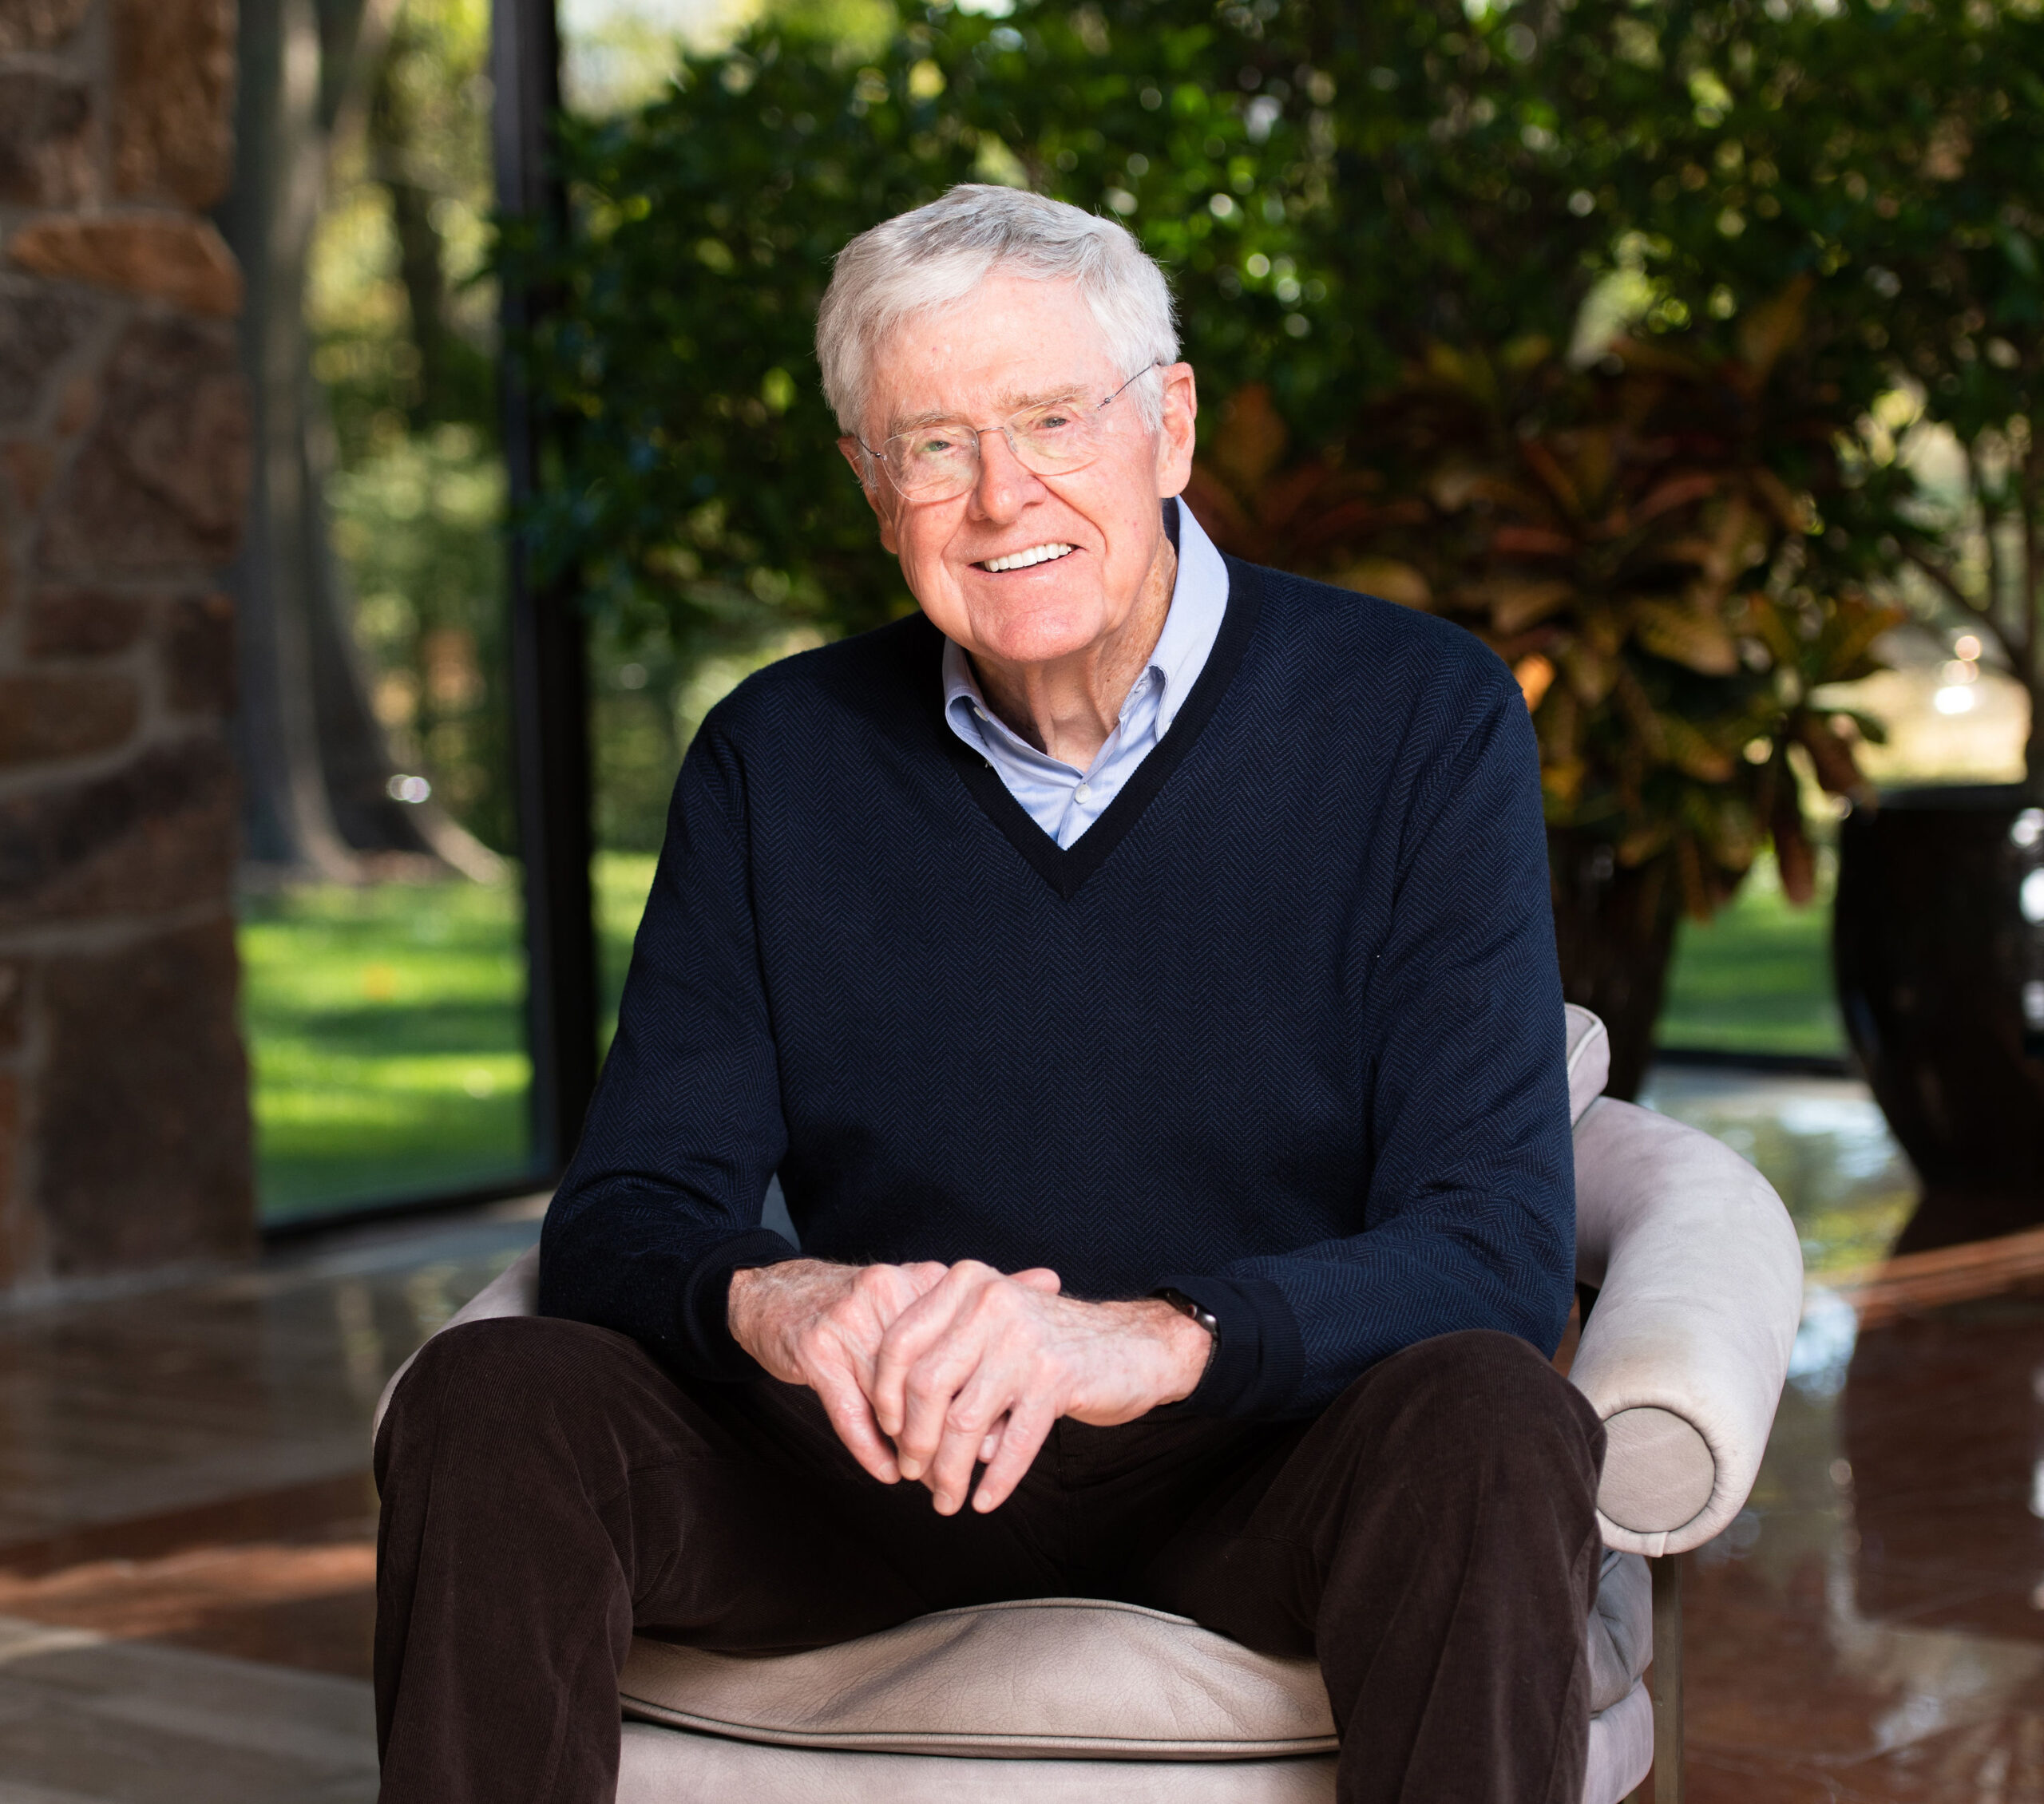 Charles Koch: The Visionary Philanthropist and Business Magnate